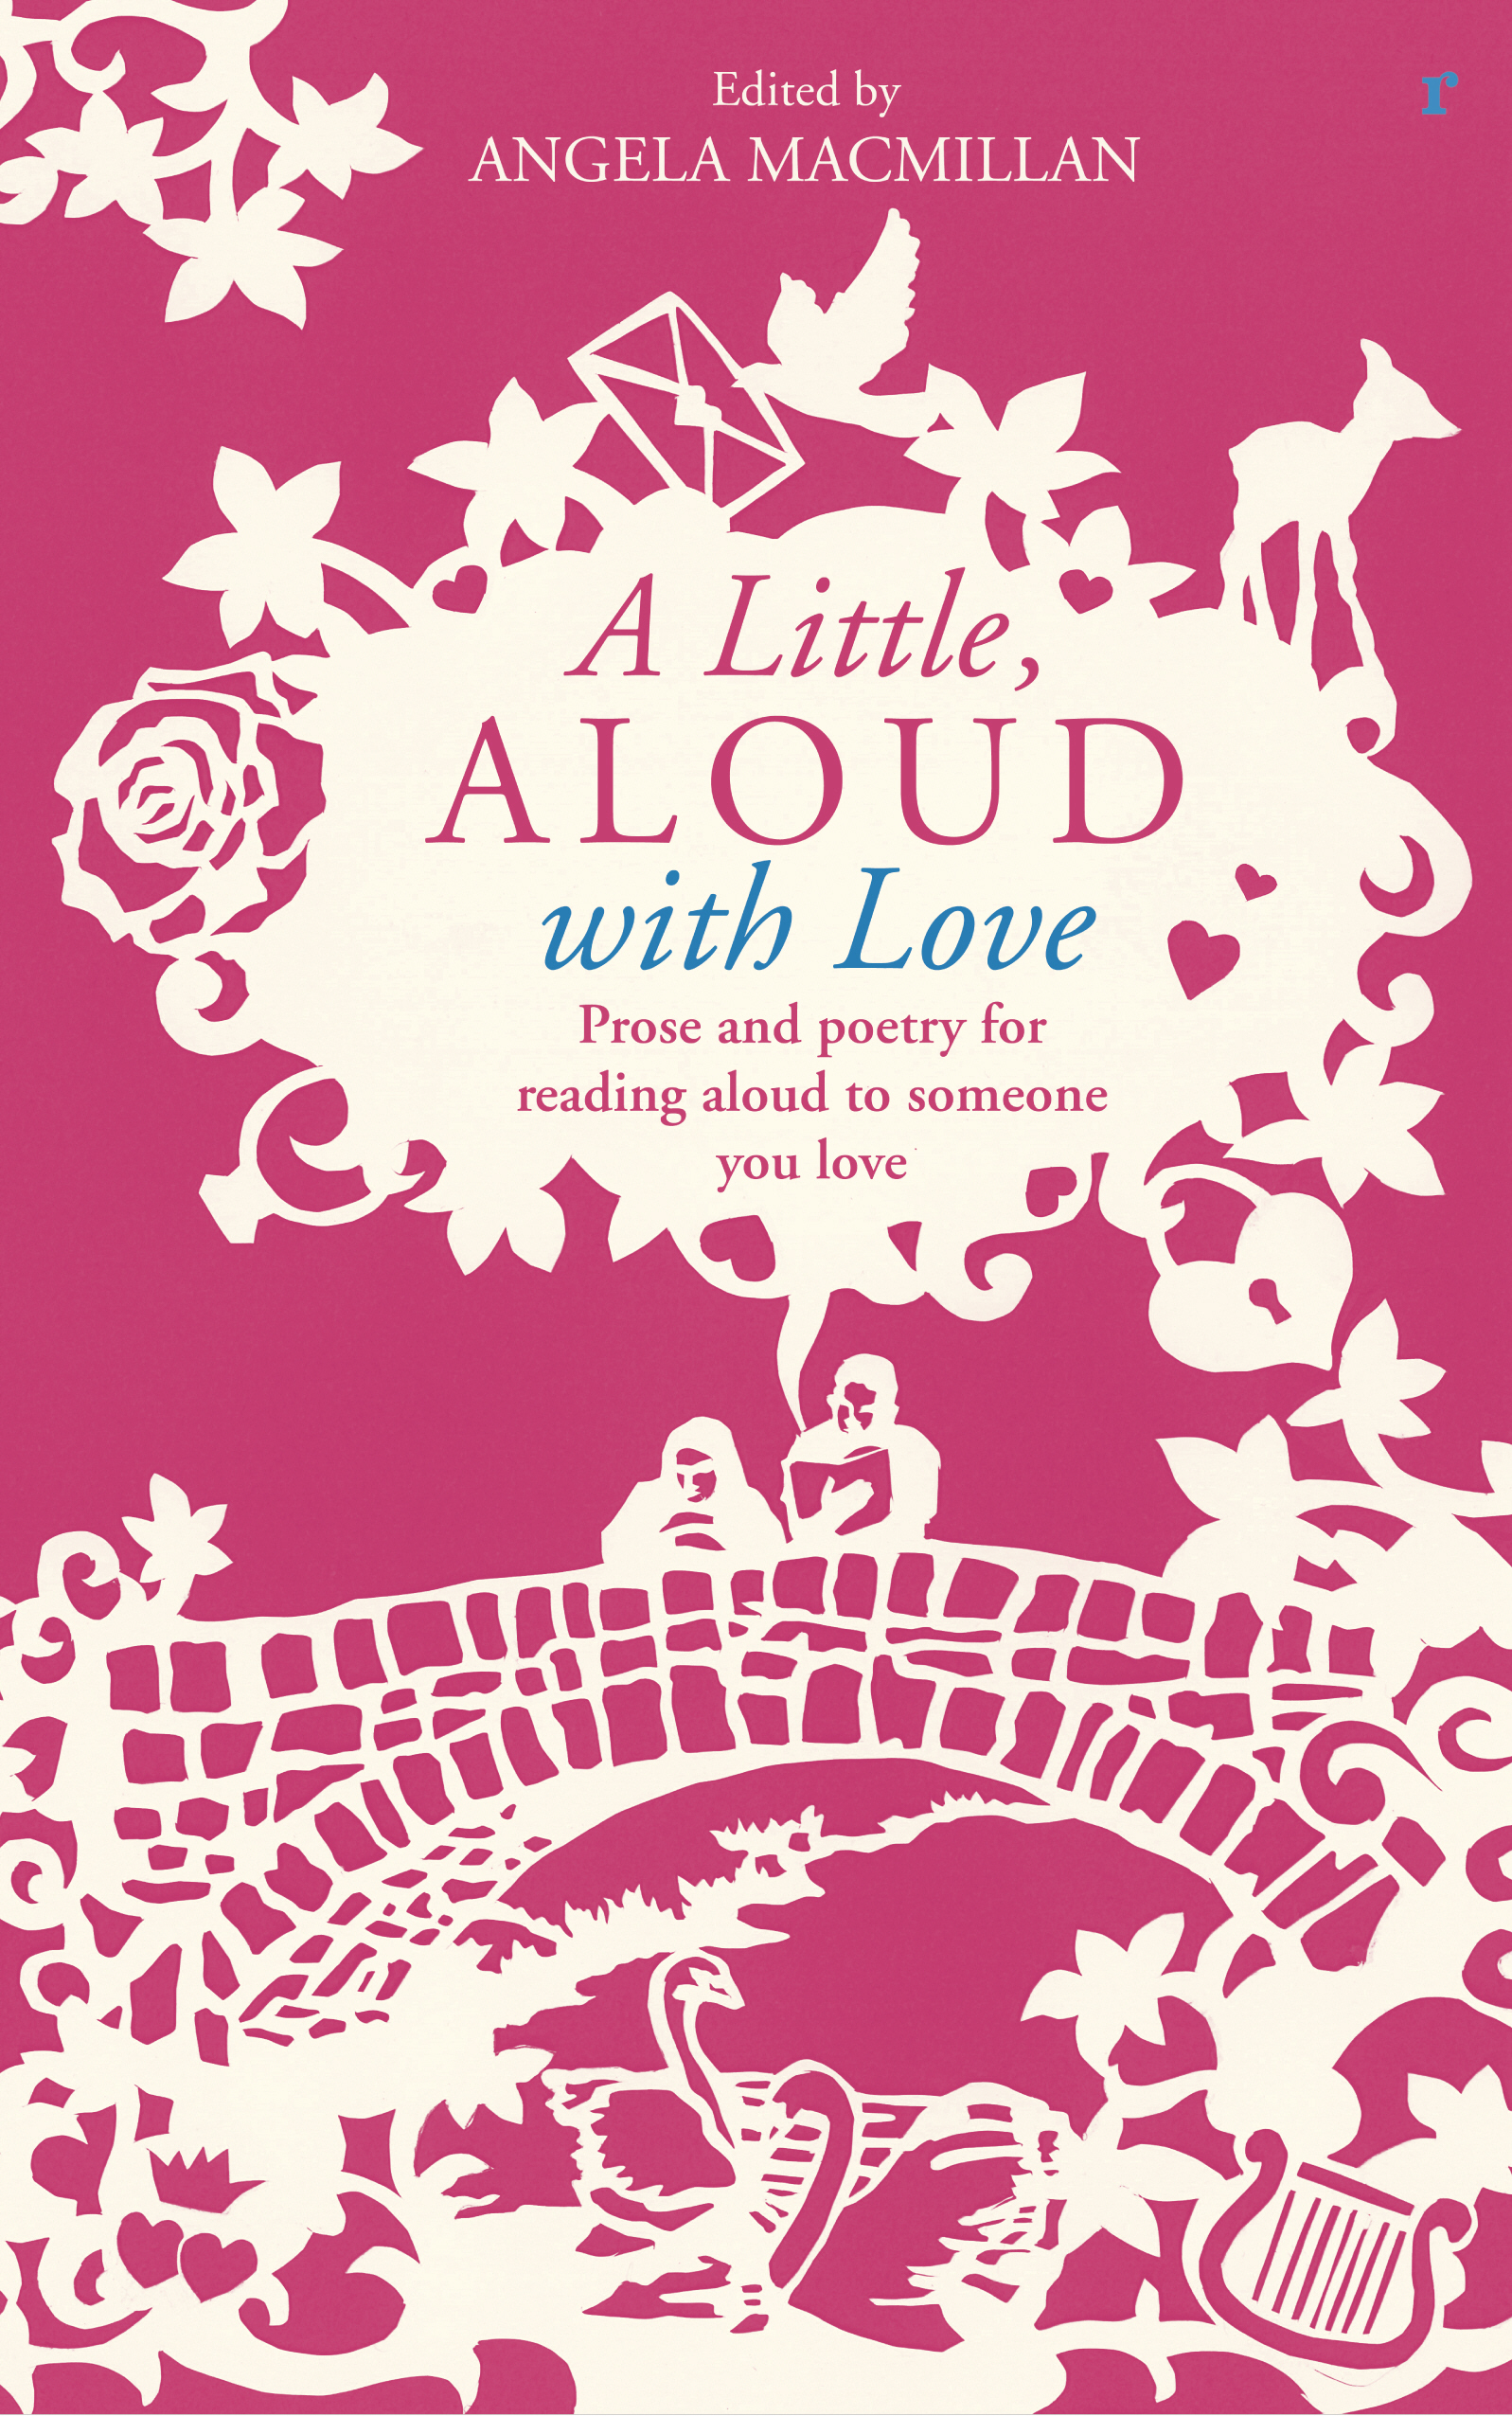 Our new read-aloud anthology A Little, Aloud with Love - perfect to celebrate World Read Aloud Day!